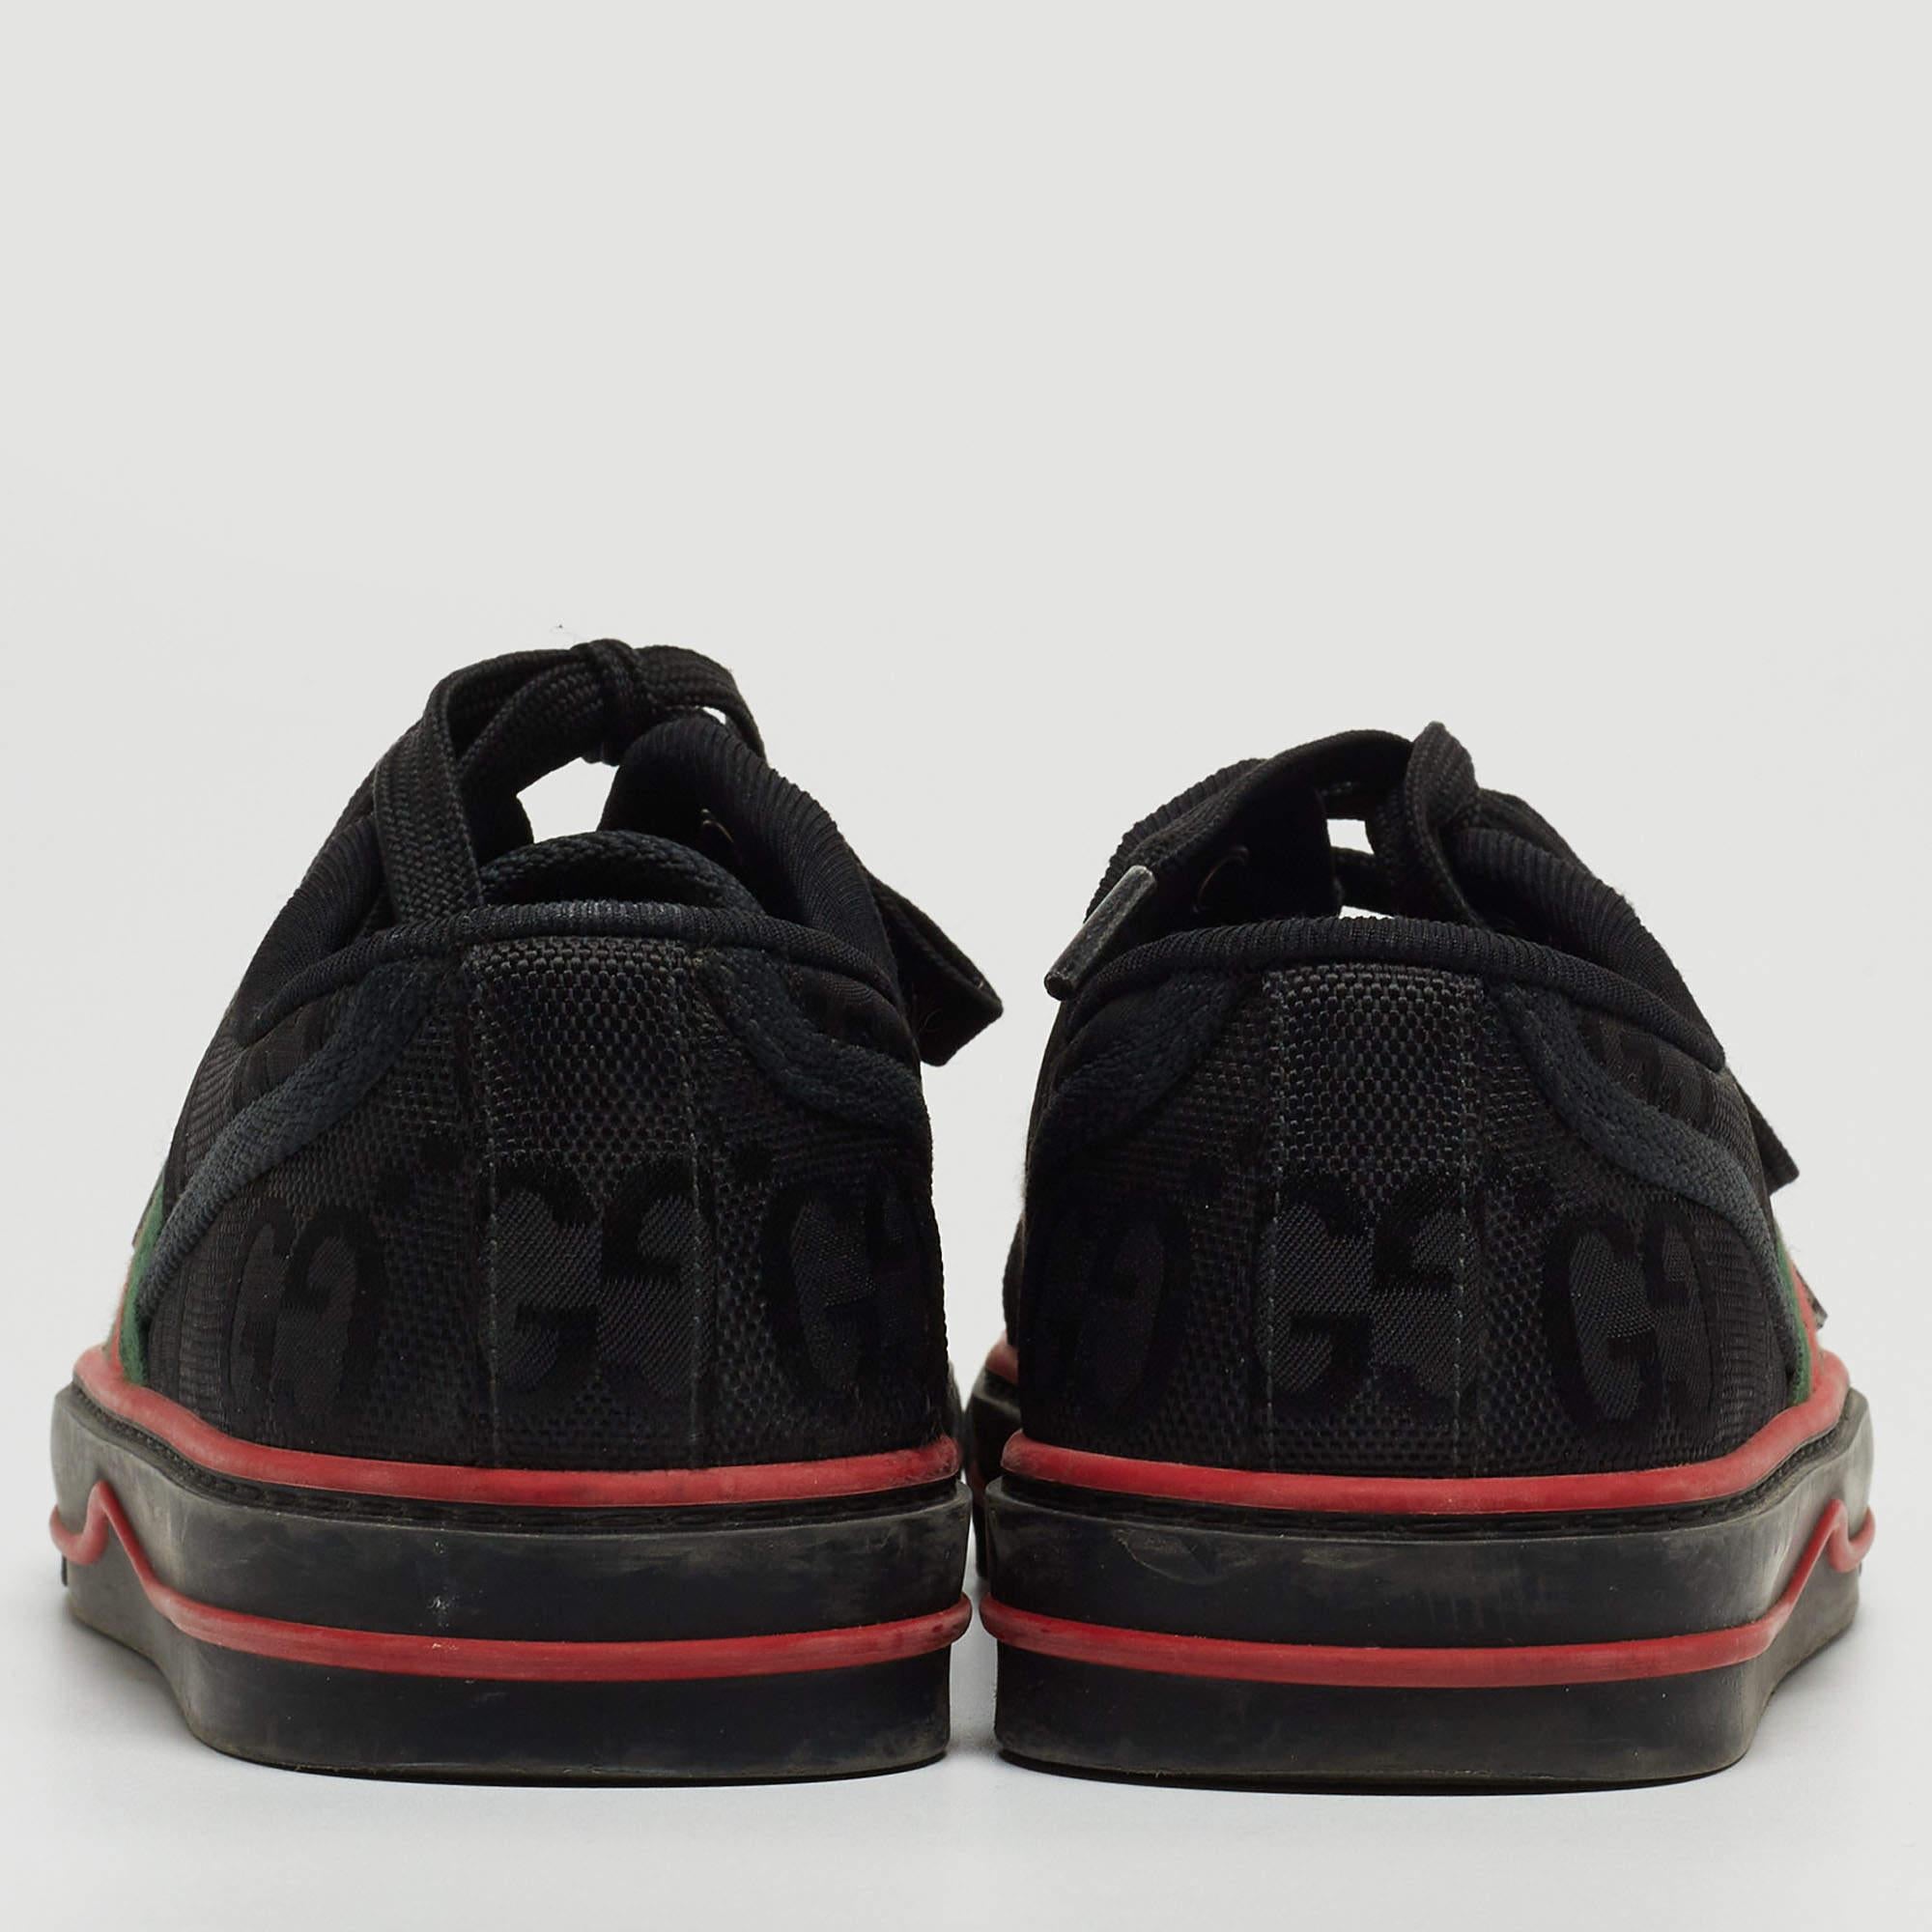 Gucci Black GG Canvas Tennis 1977 Sneakers Size 36 For Sale 2